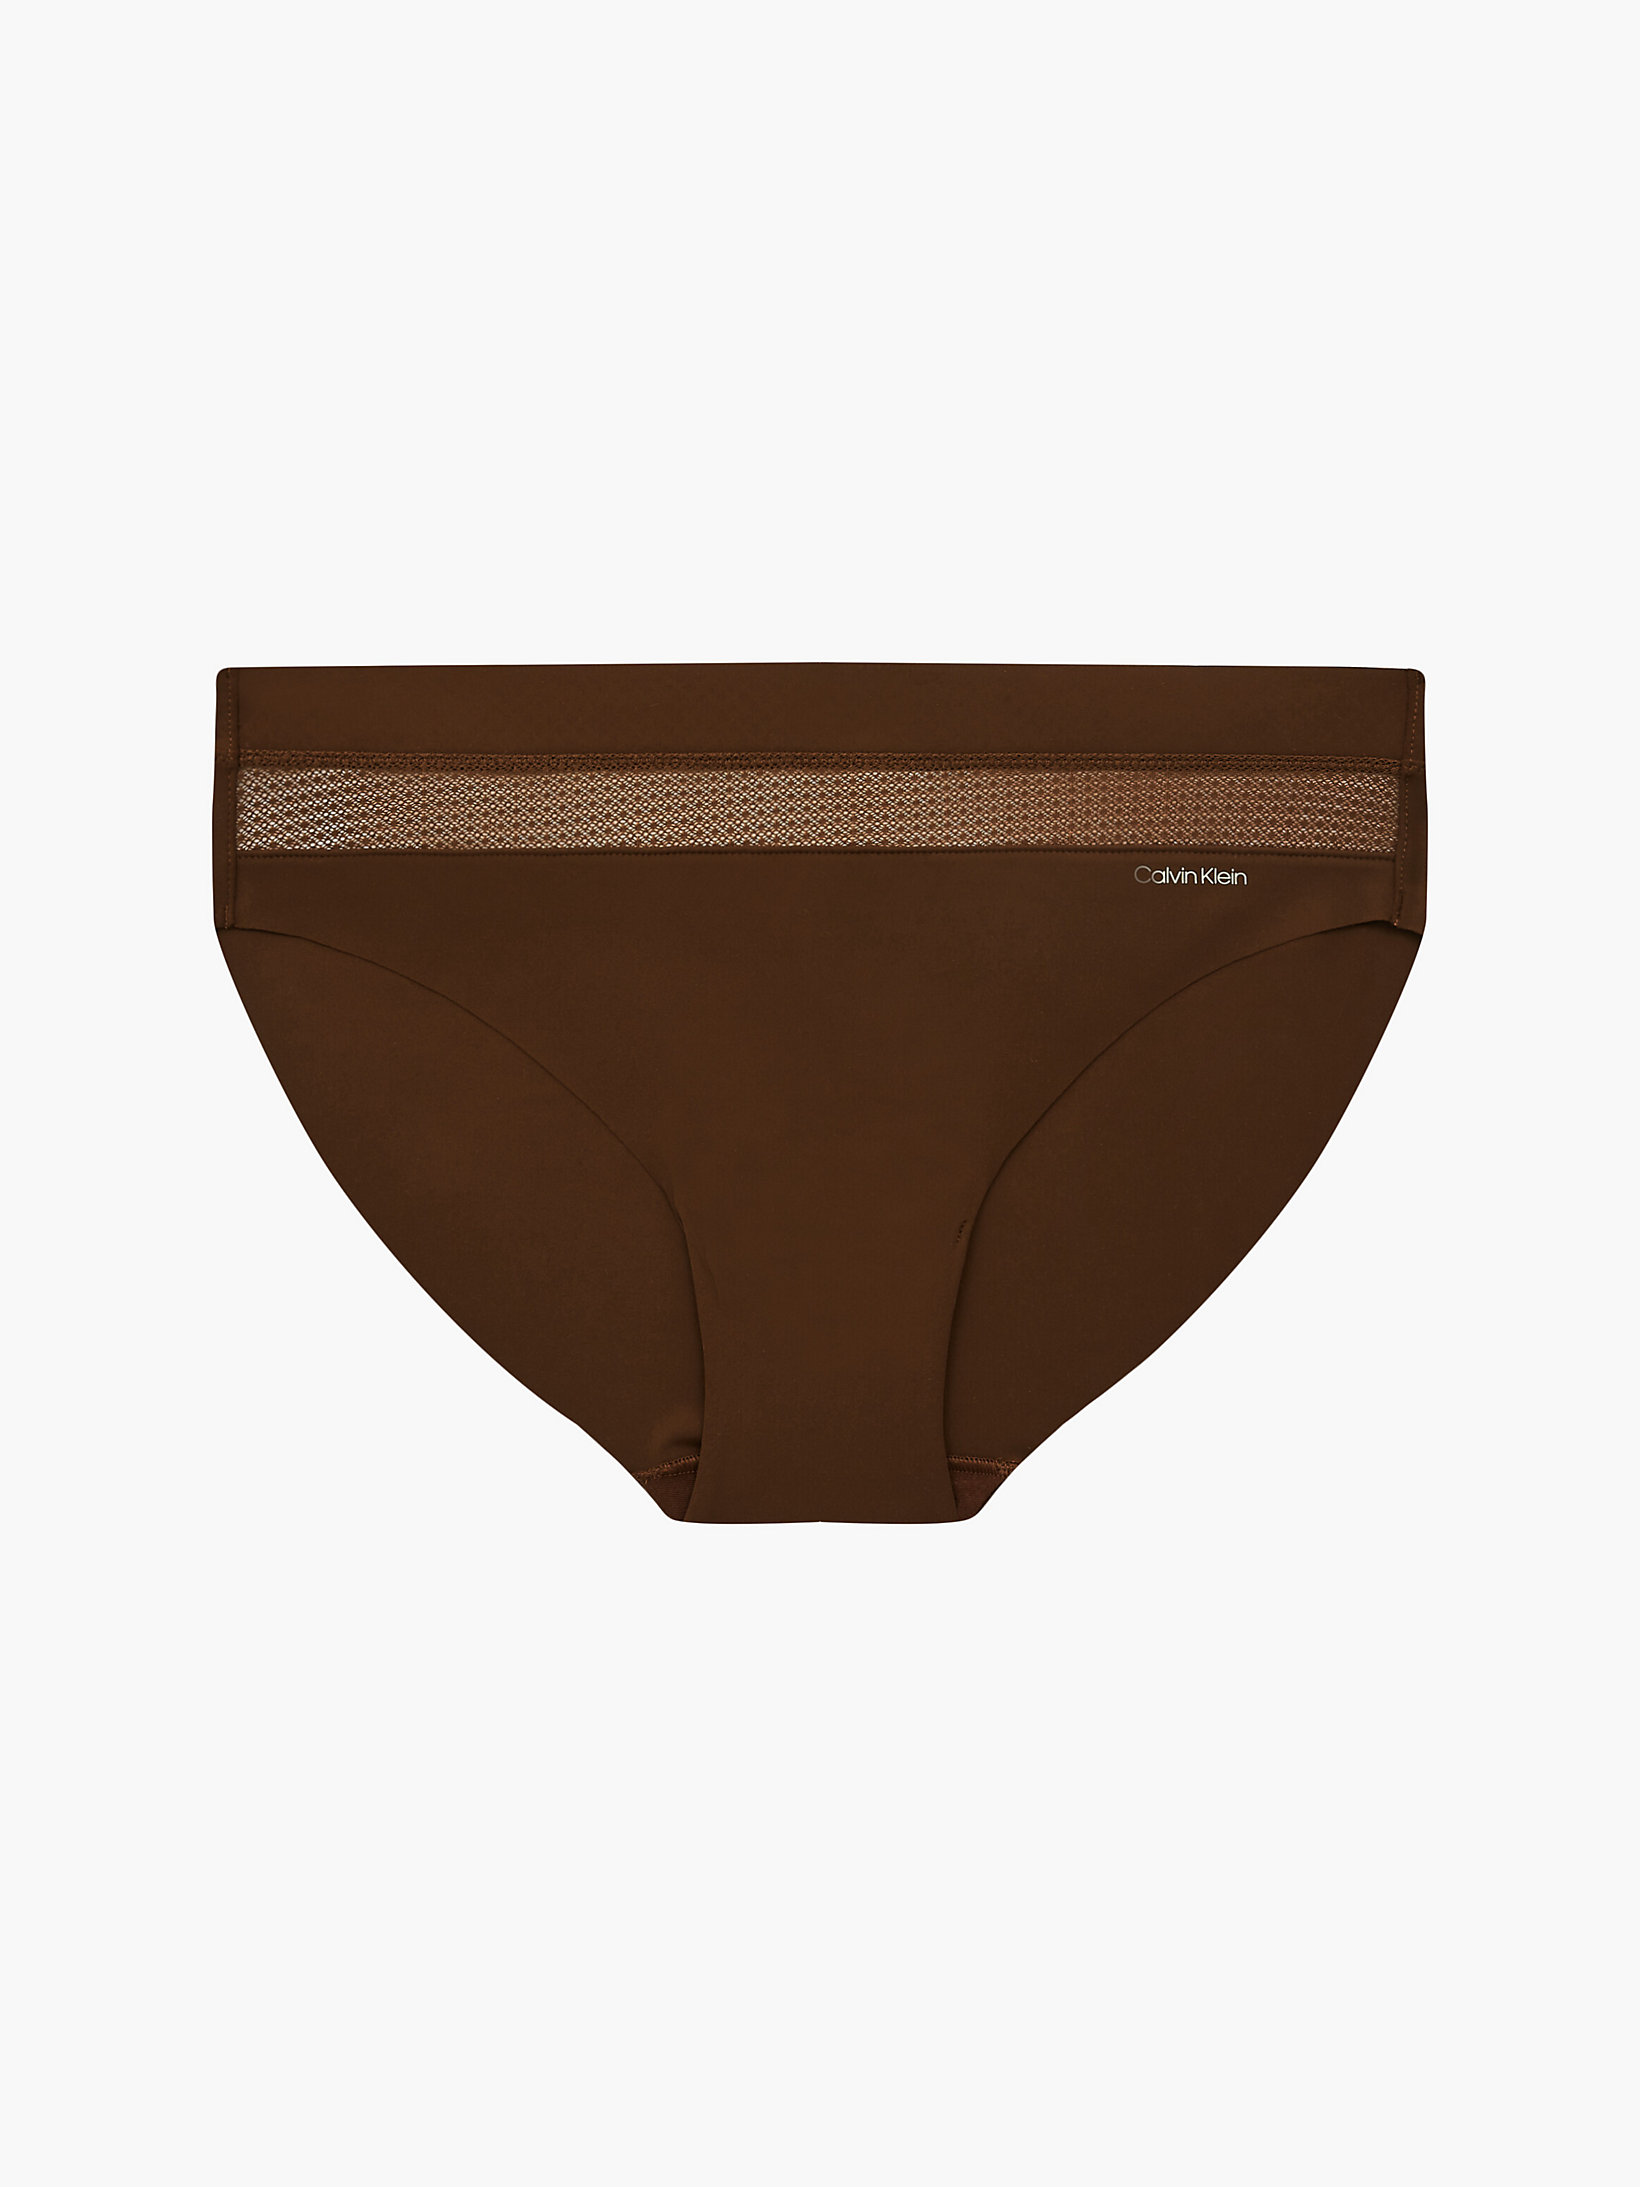 Culotte - Perfectly Fit Flex > Umber > undefined femmes > Calvin Klein